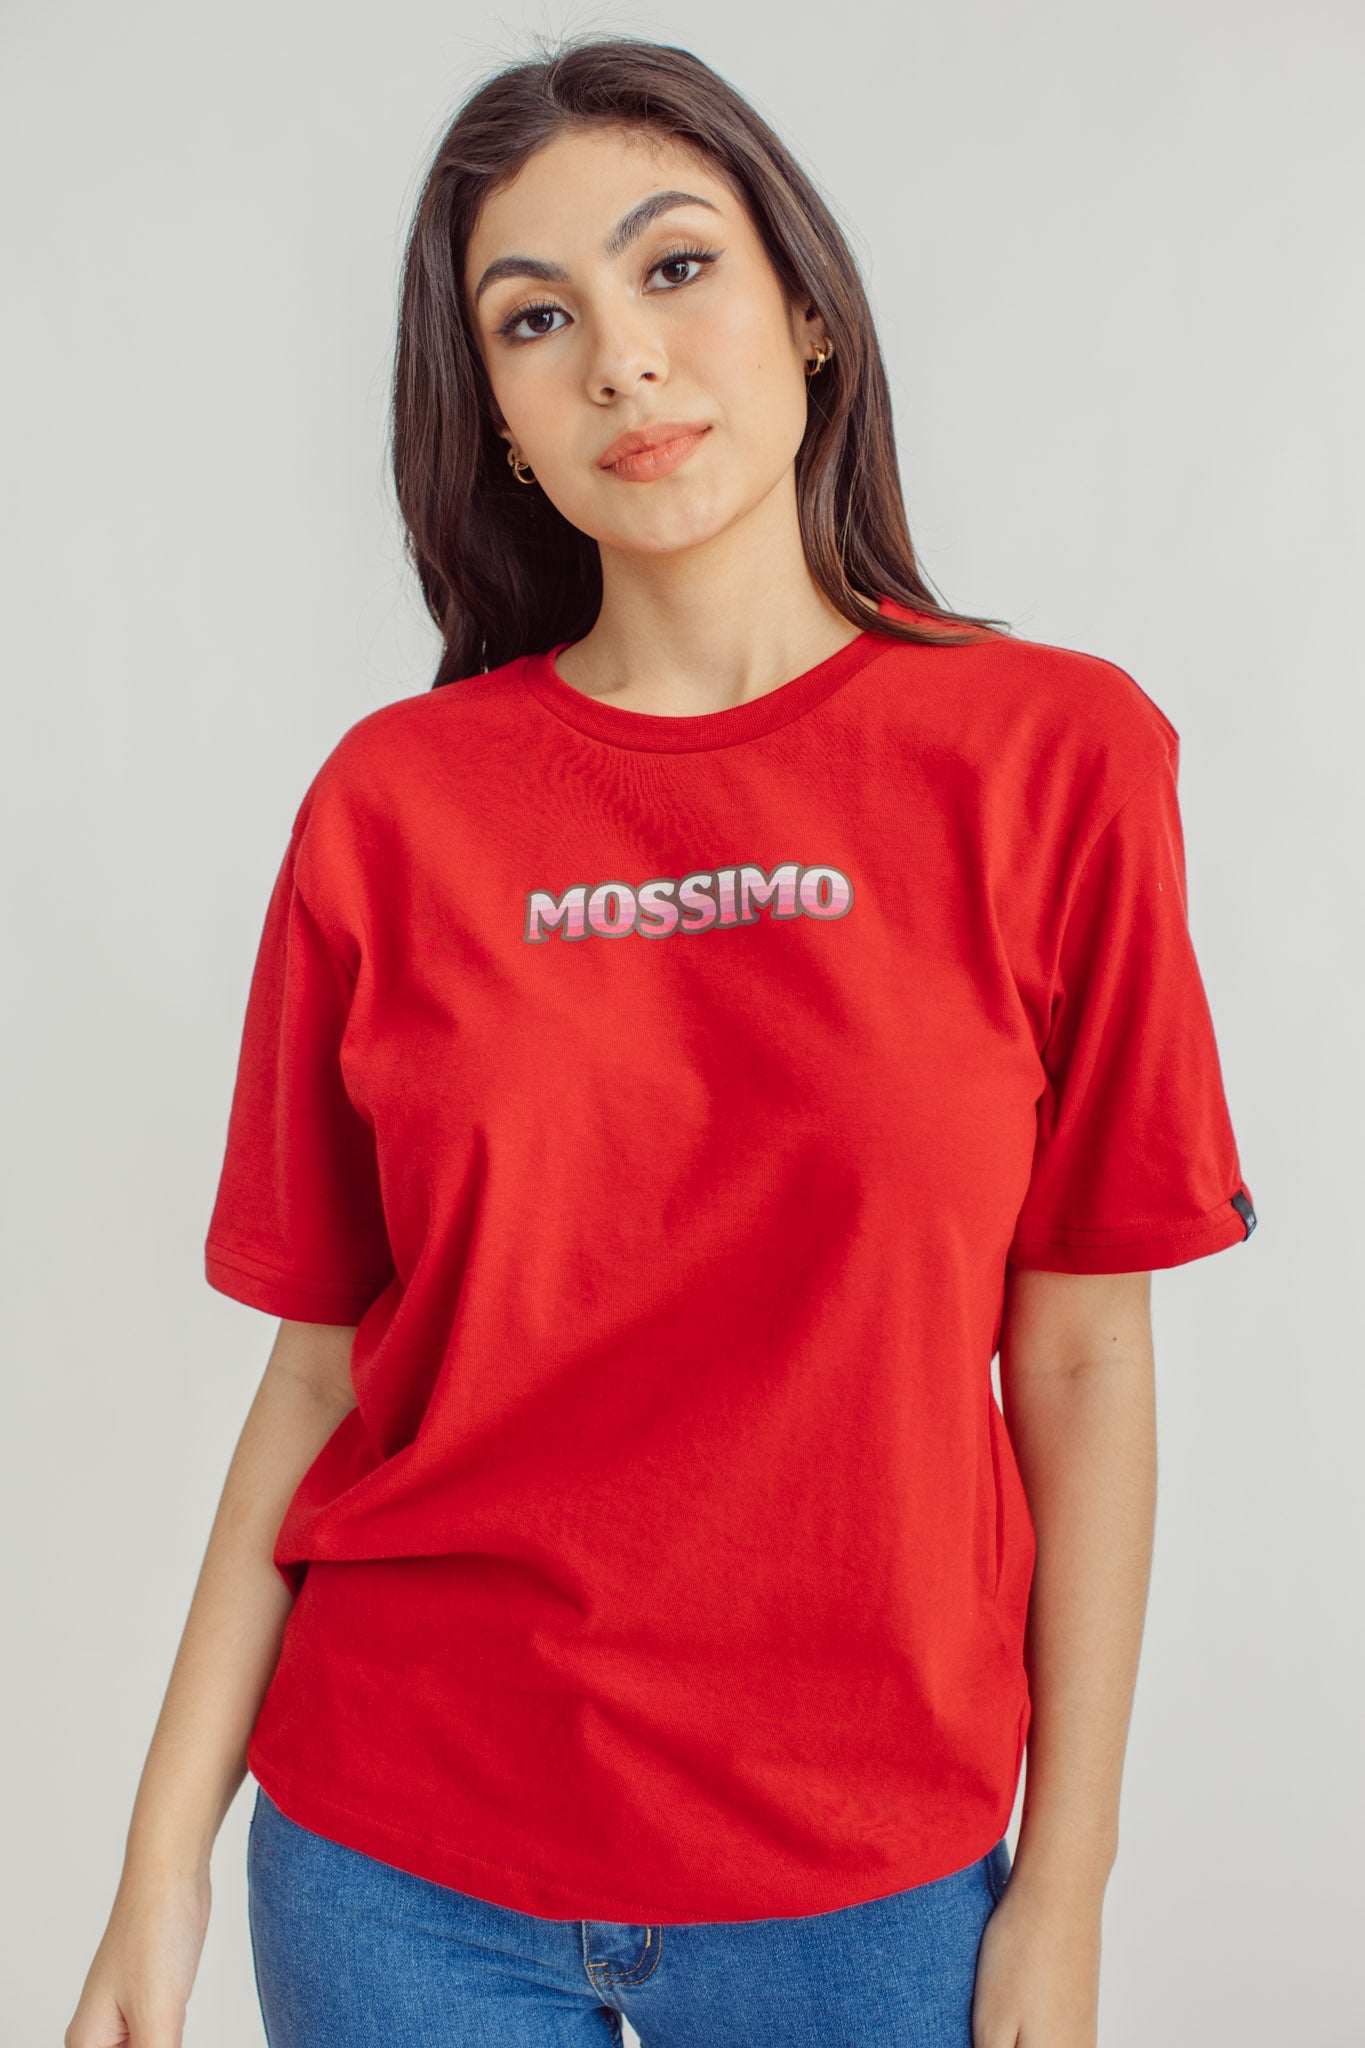 Rio Red with Mossimo Big Branding Multi Colored Modern Fit Tee